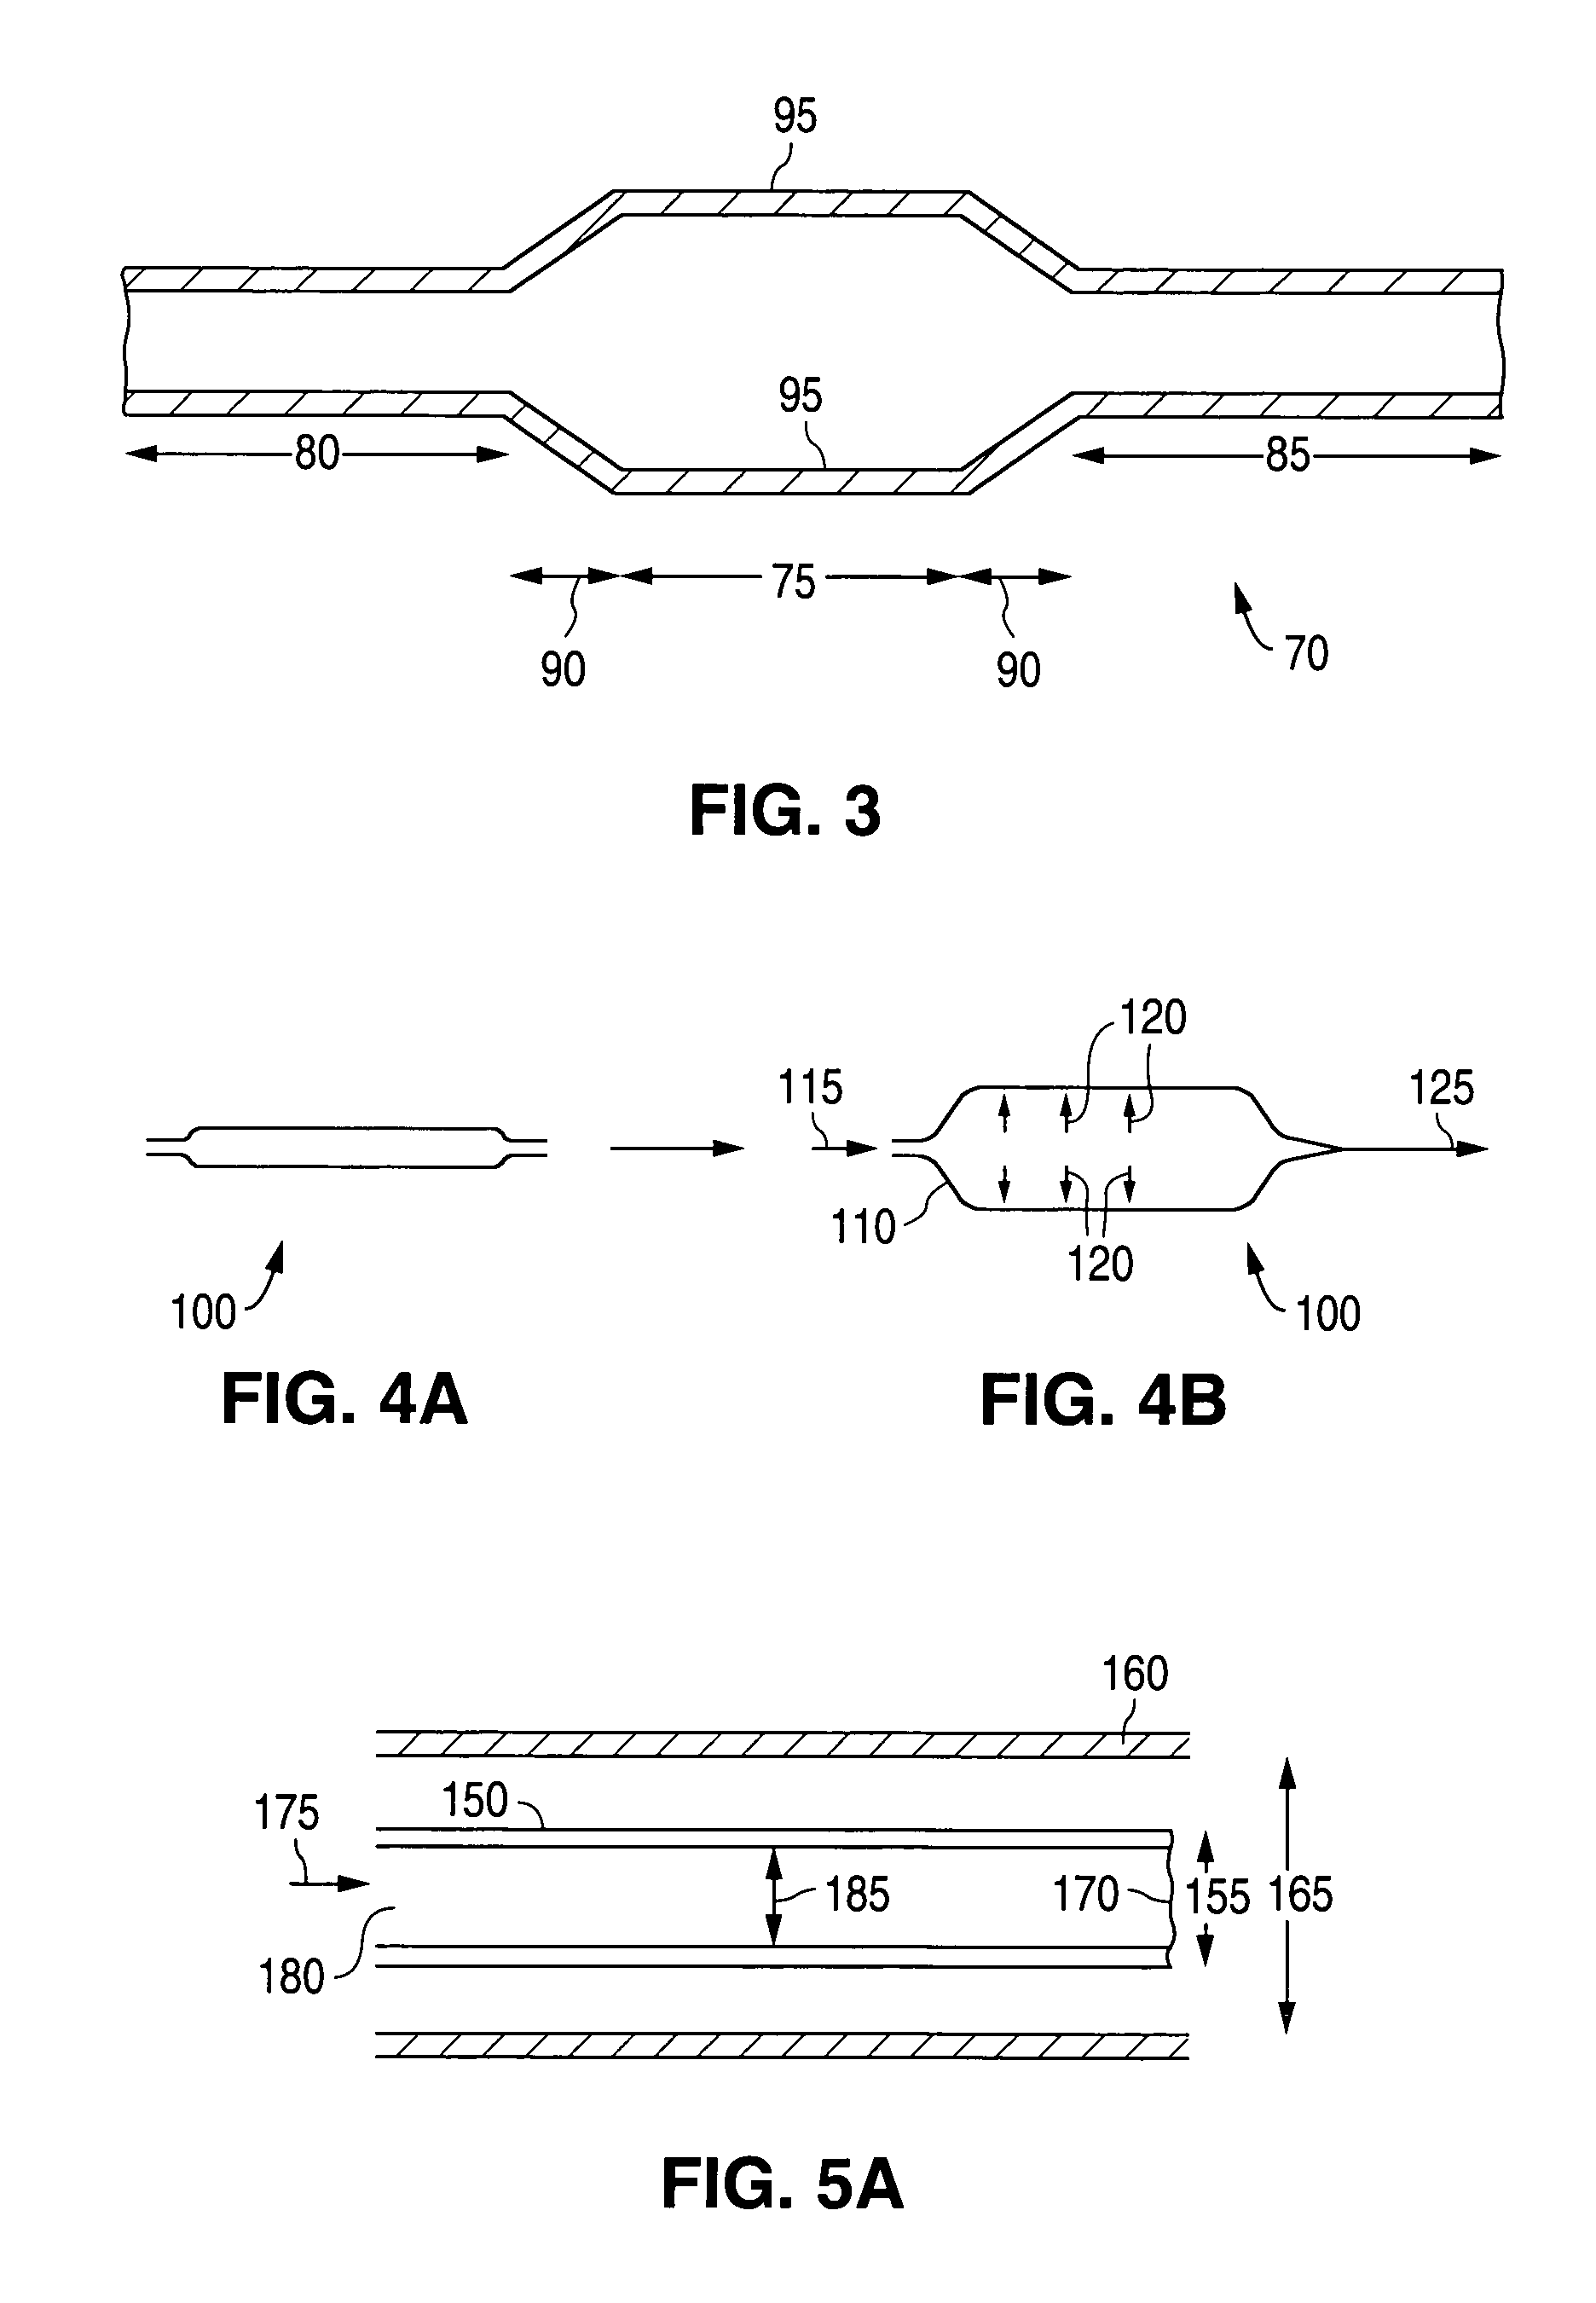 Controlled deformation of a polymer tube with a restraining surface in fabricating a medical article